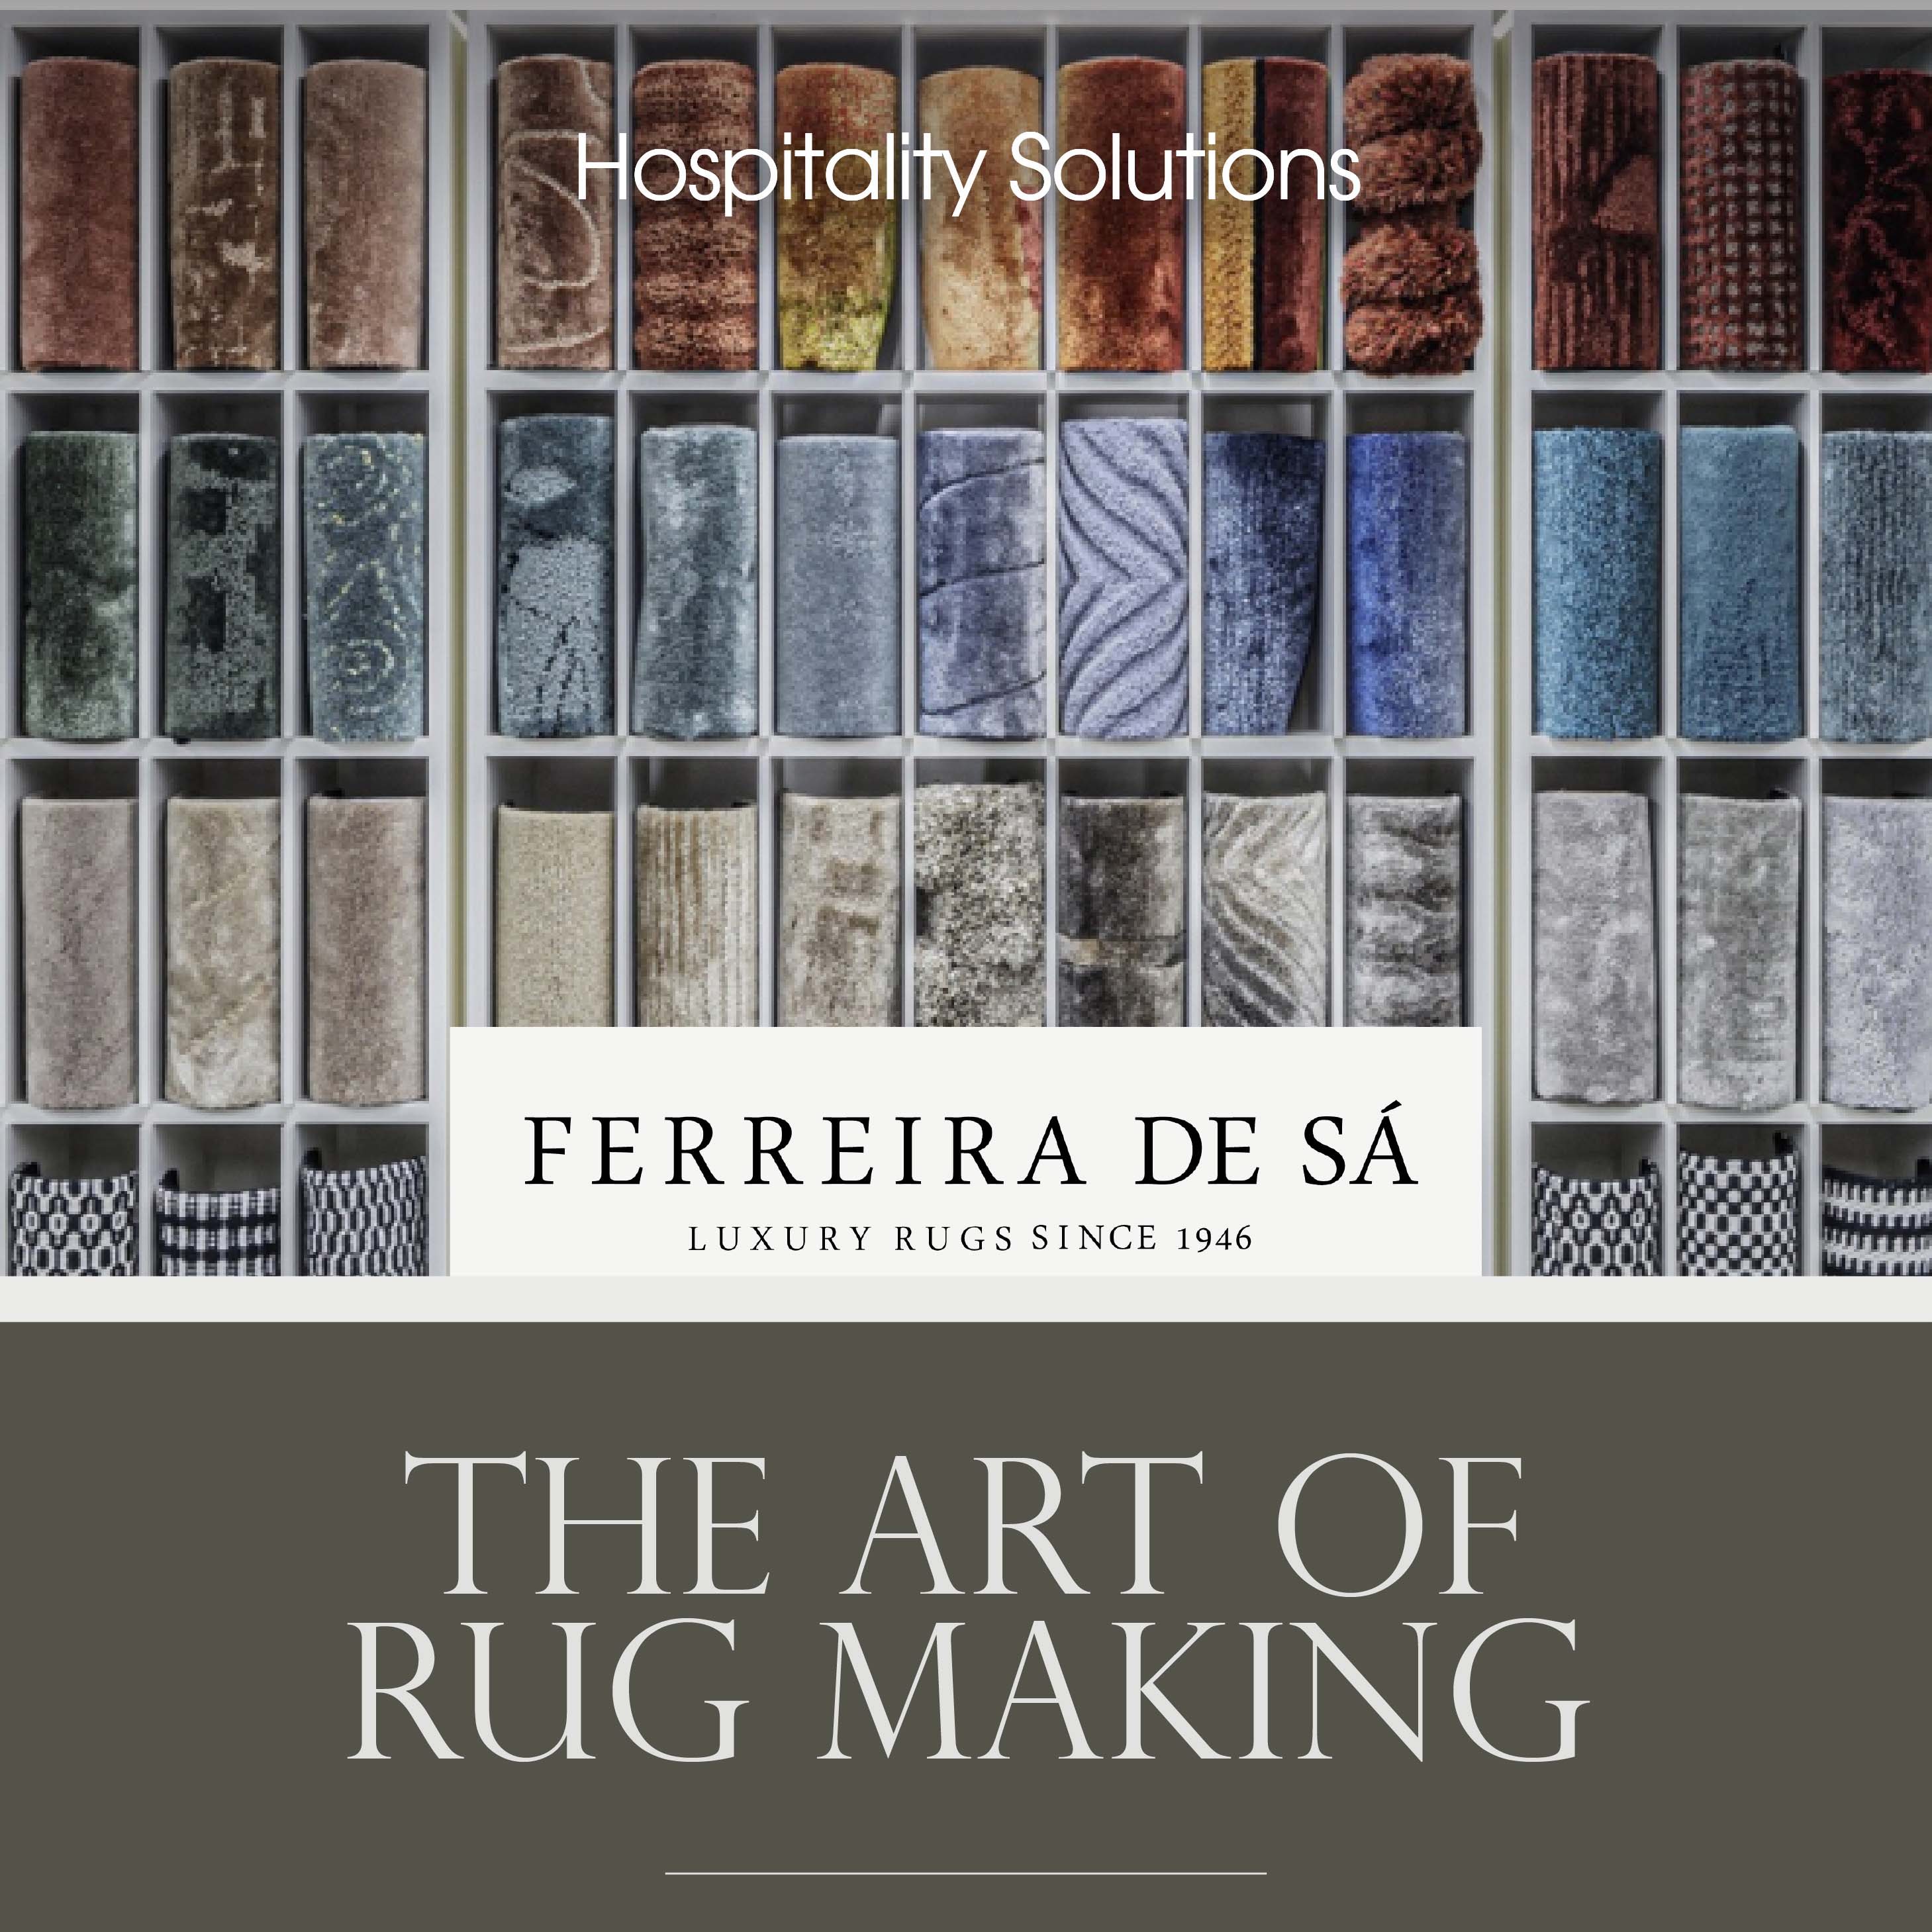 COLOURLIVING | HOSPITALITY SOLUTIONS | THE ART OF RUG MAKING